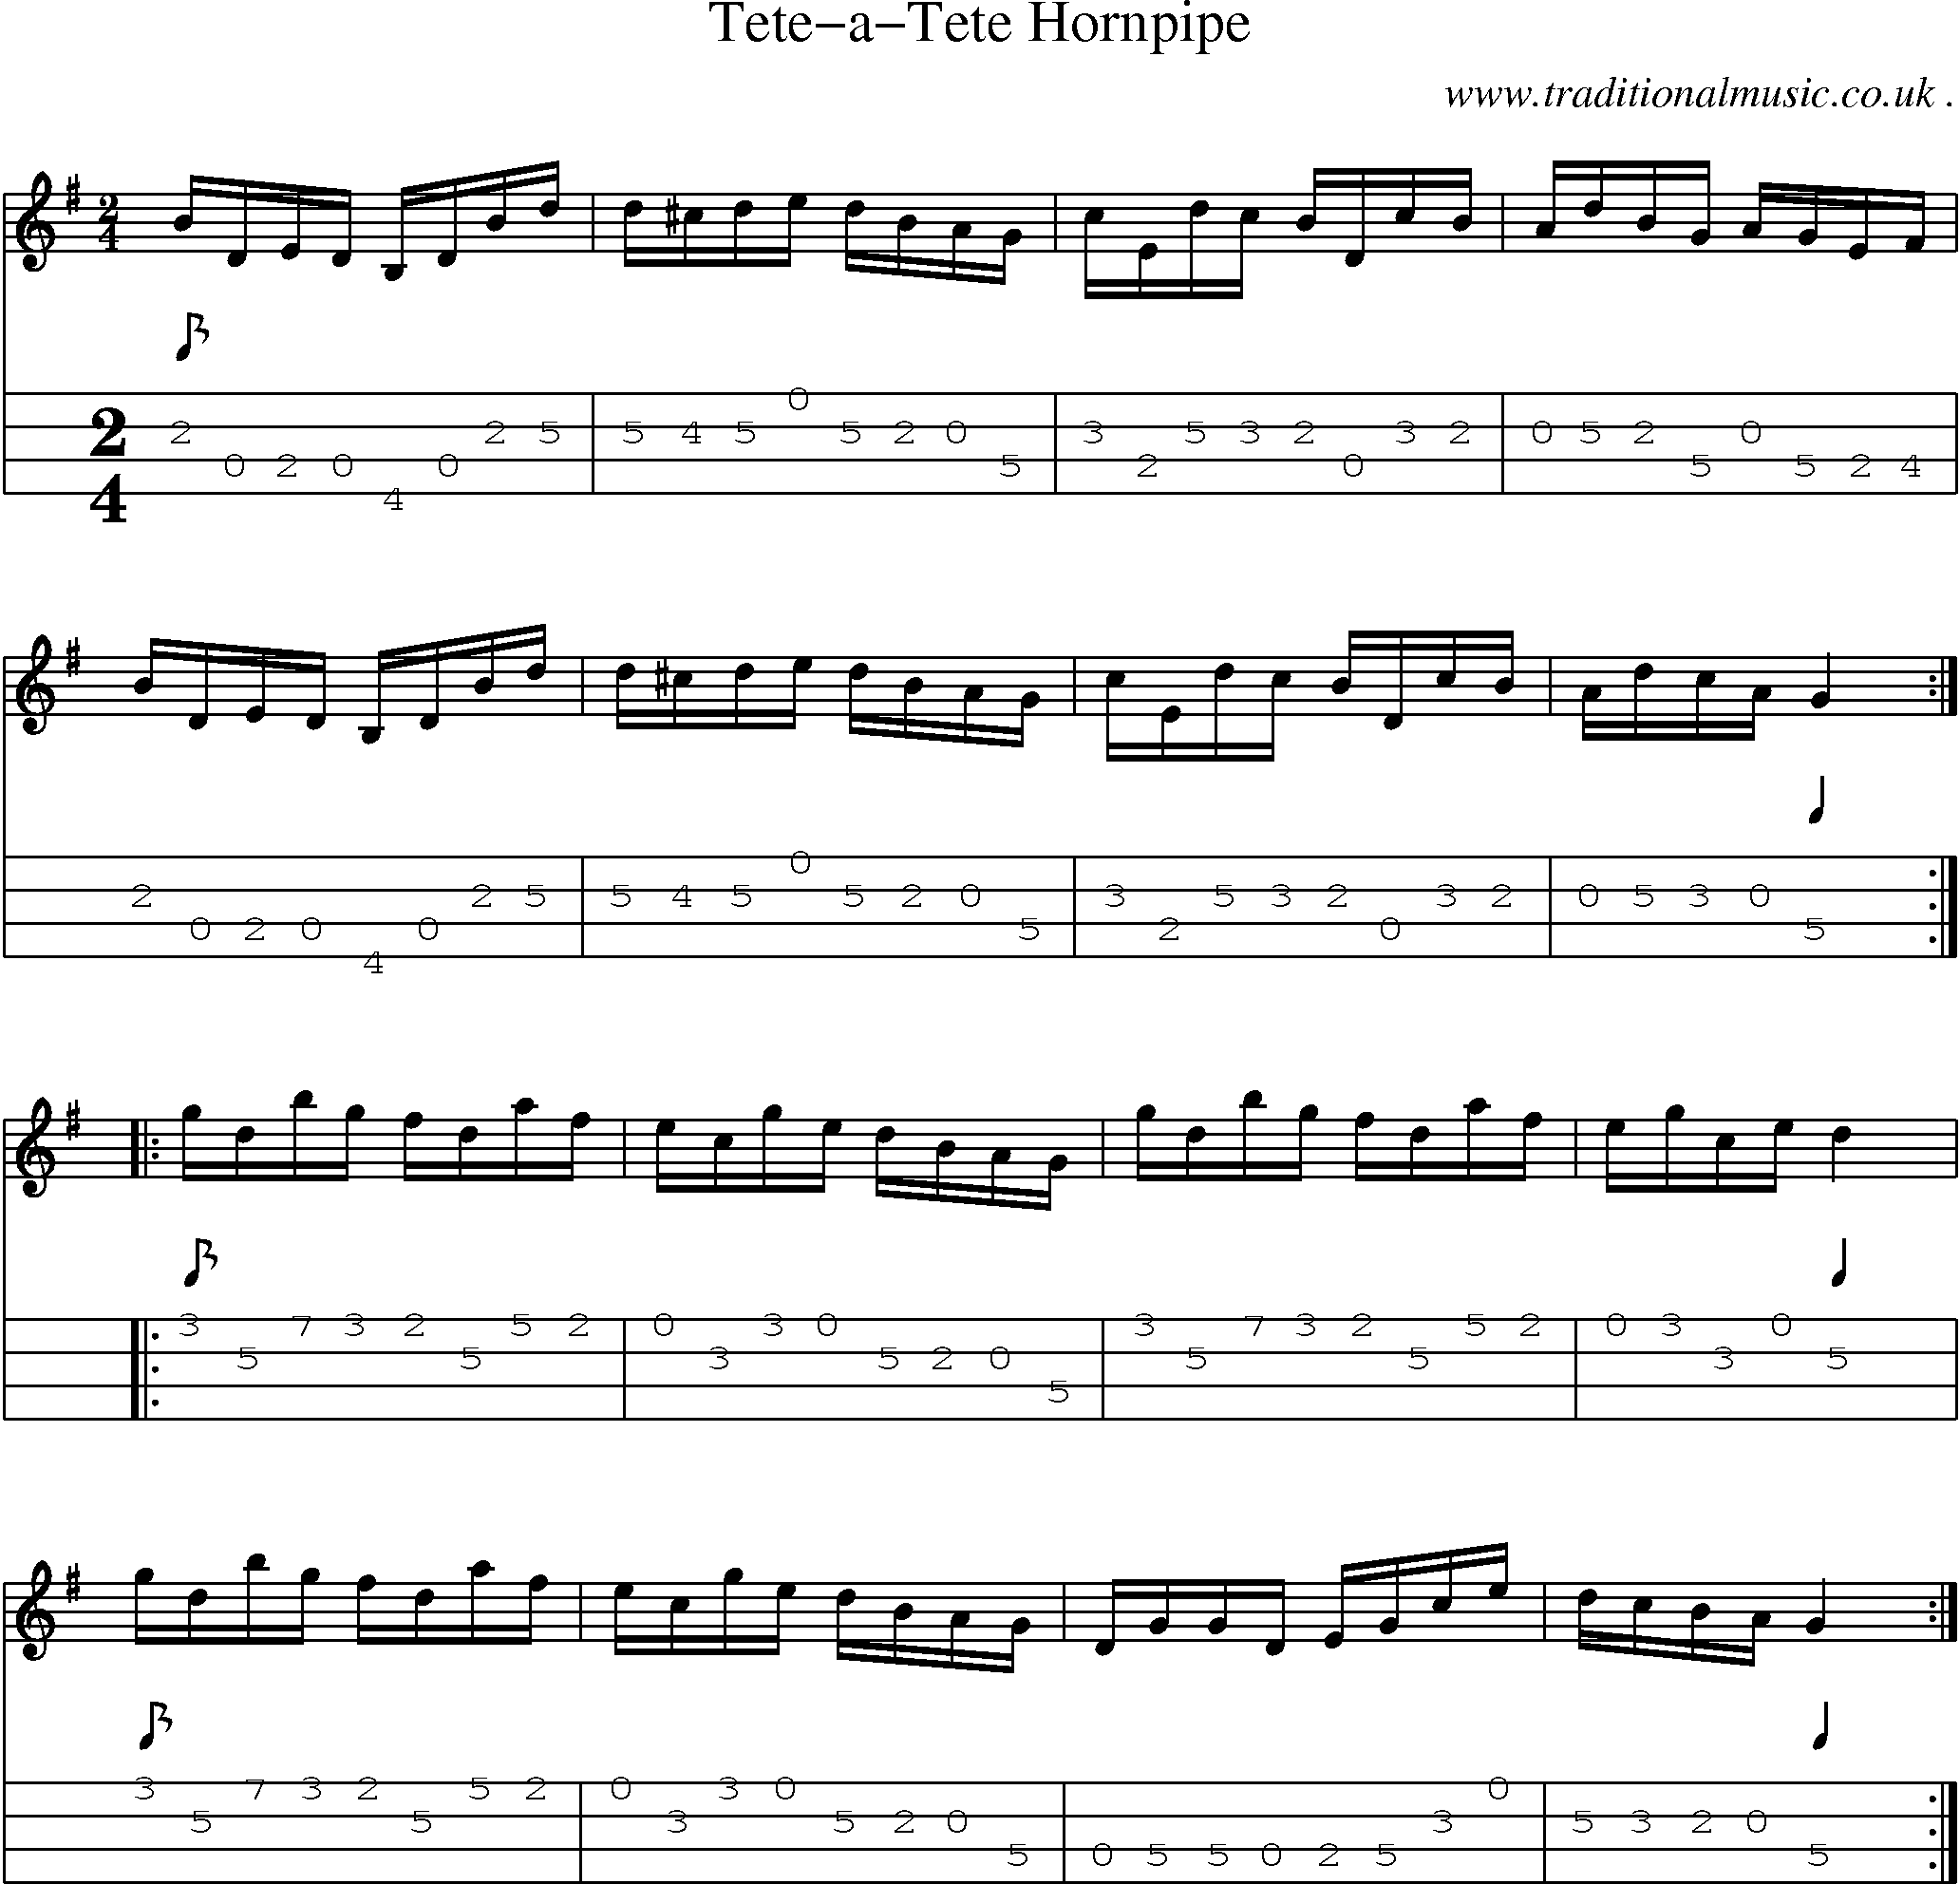 Sheet-Music and Mandolin Tabs for Tete-a-tete Hornpipe